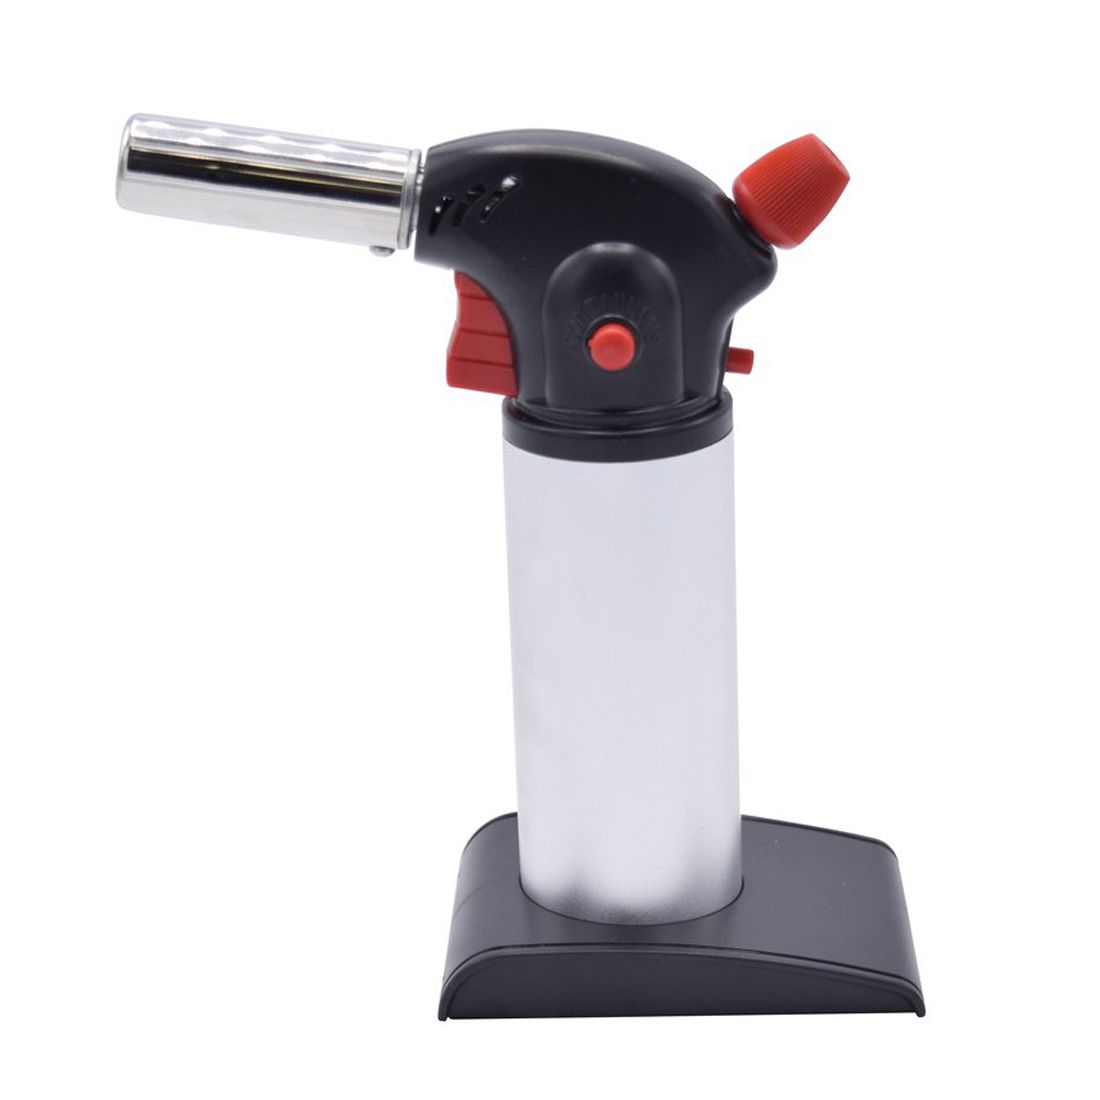 Jm White Kitchen Blow Torch Buy Online at Best Price in India Snapdeal